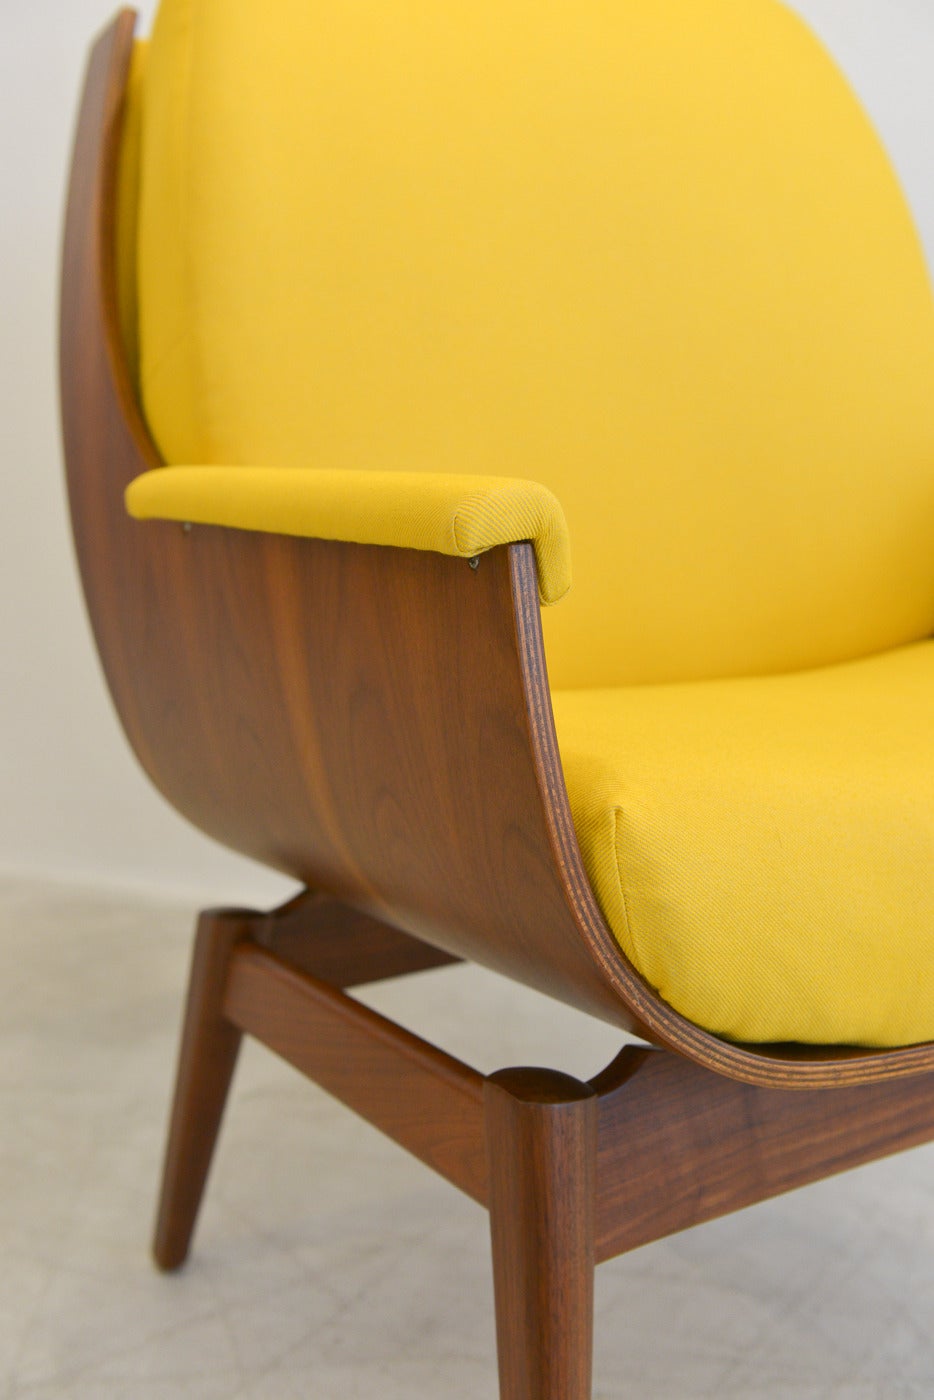 Walnut Bentwood Scoop Chair in Bright Yellow 1